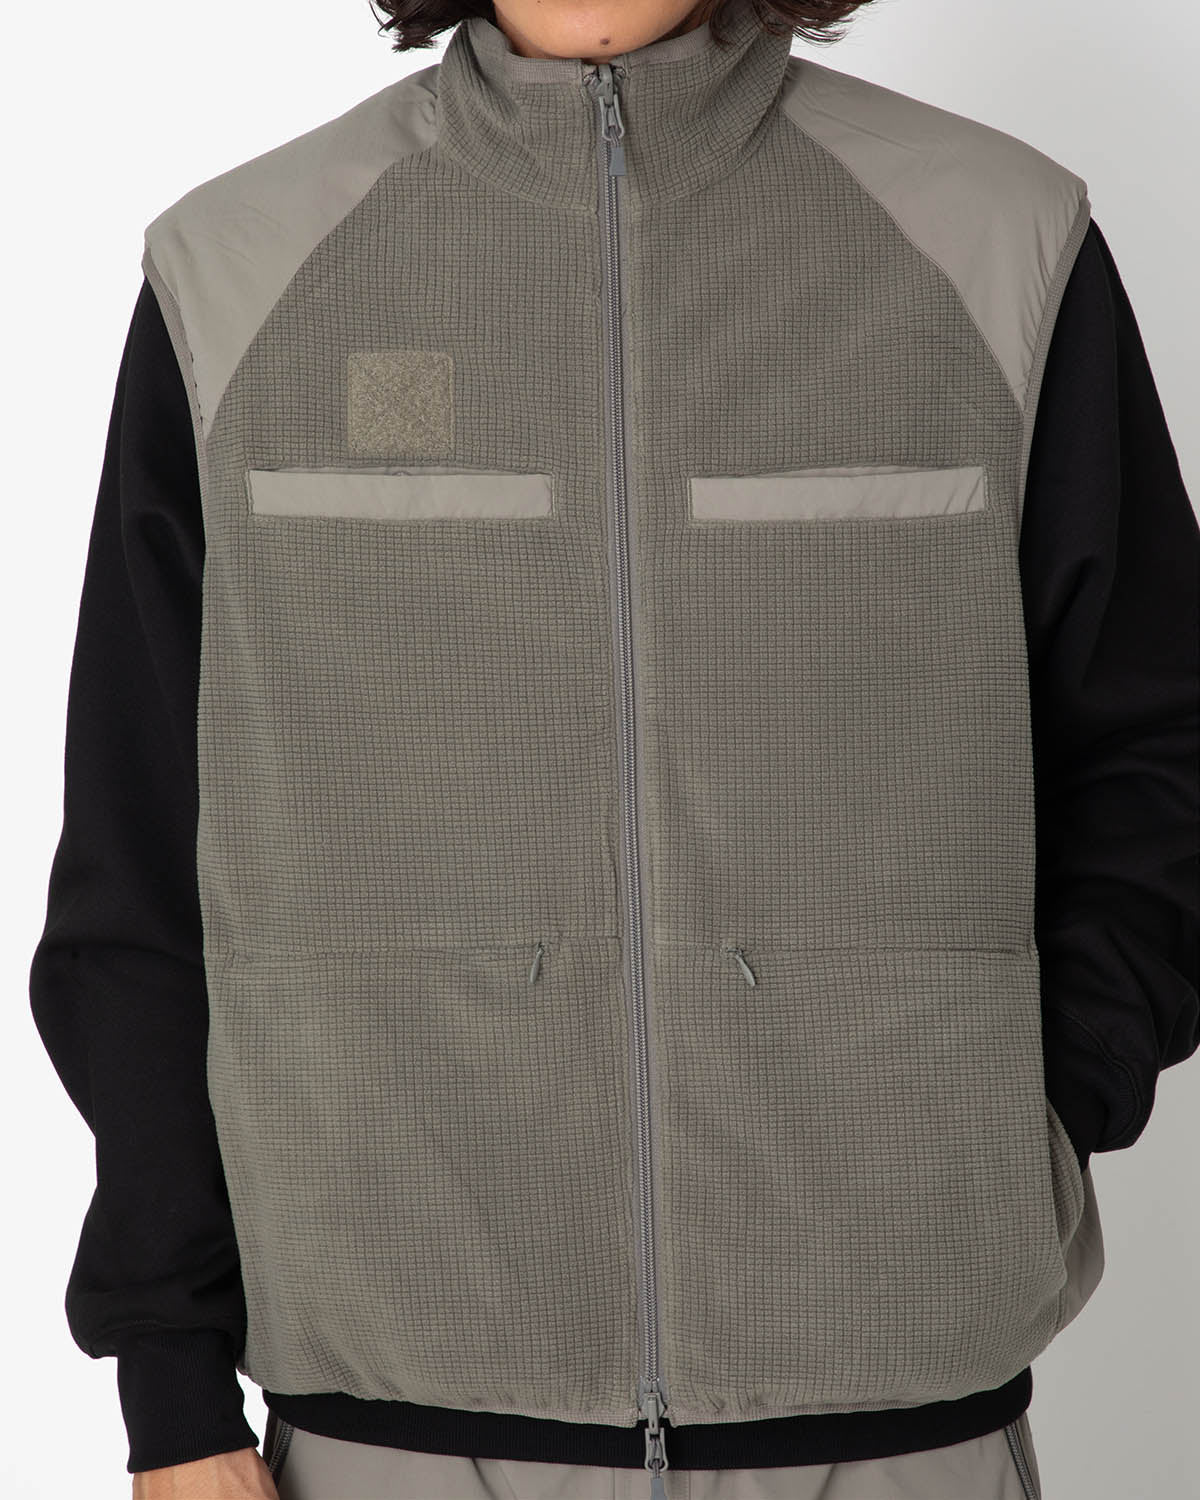 TECH REVERSIBLE MIL ECWCS STAND VEST | www.causus.be